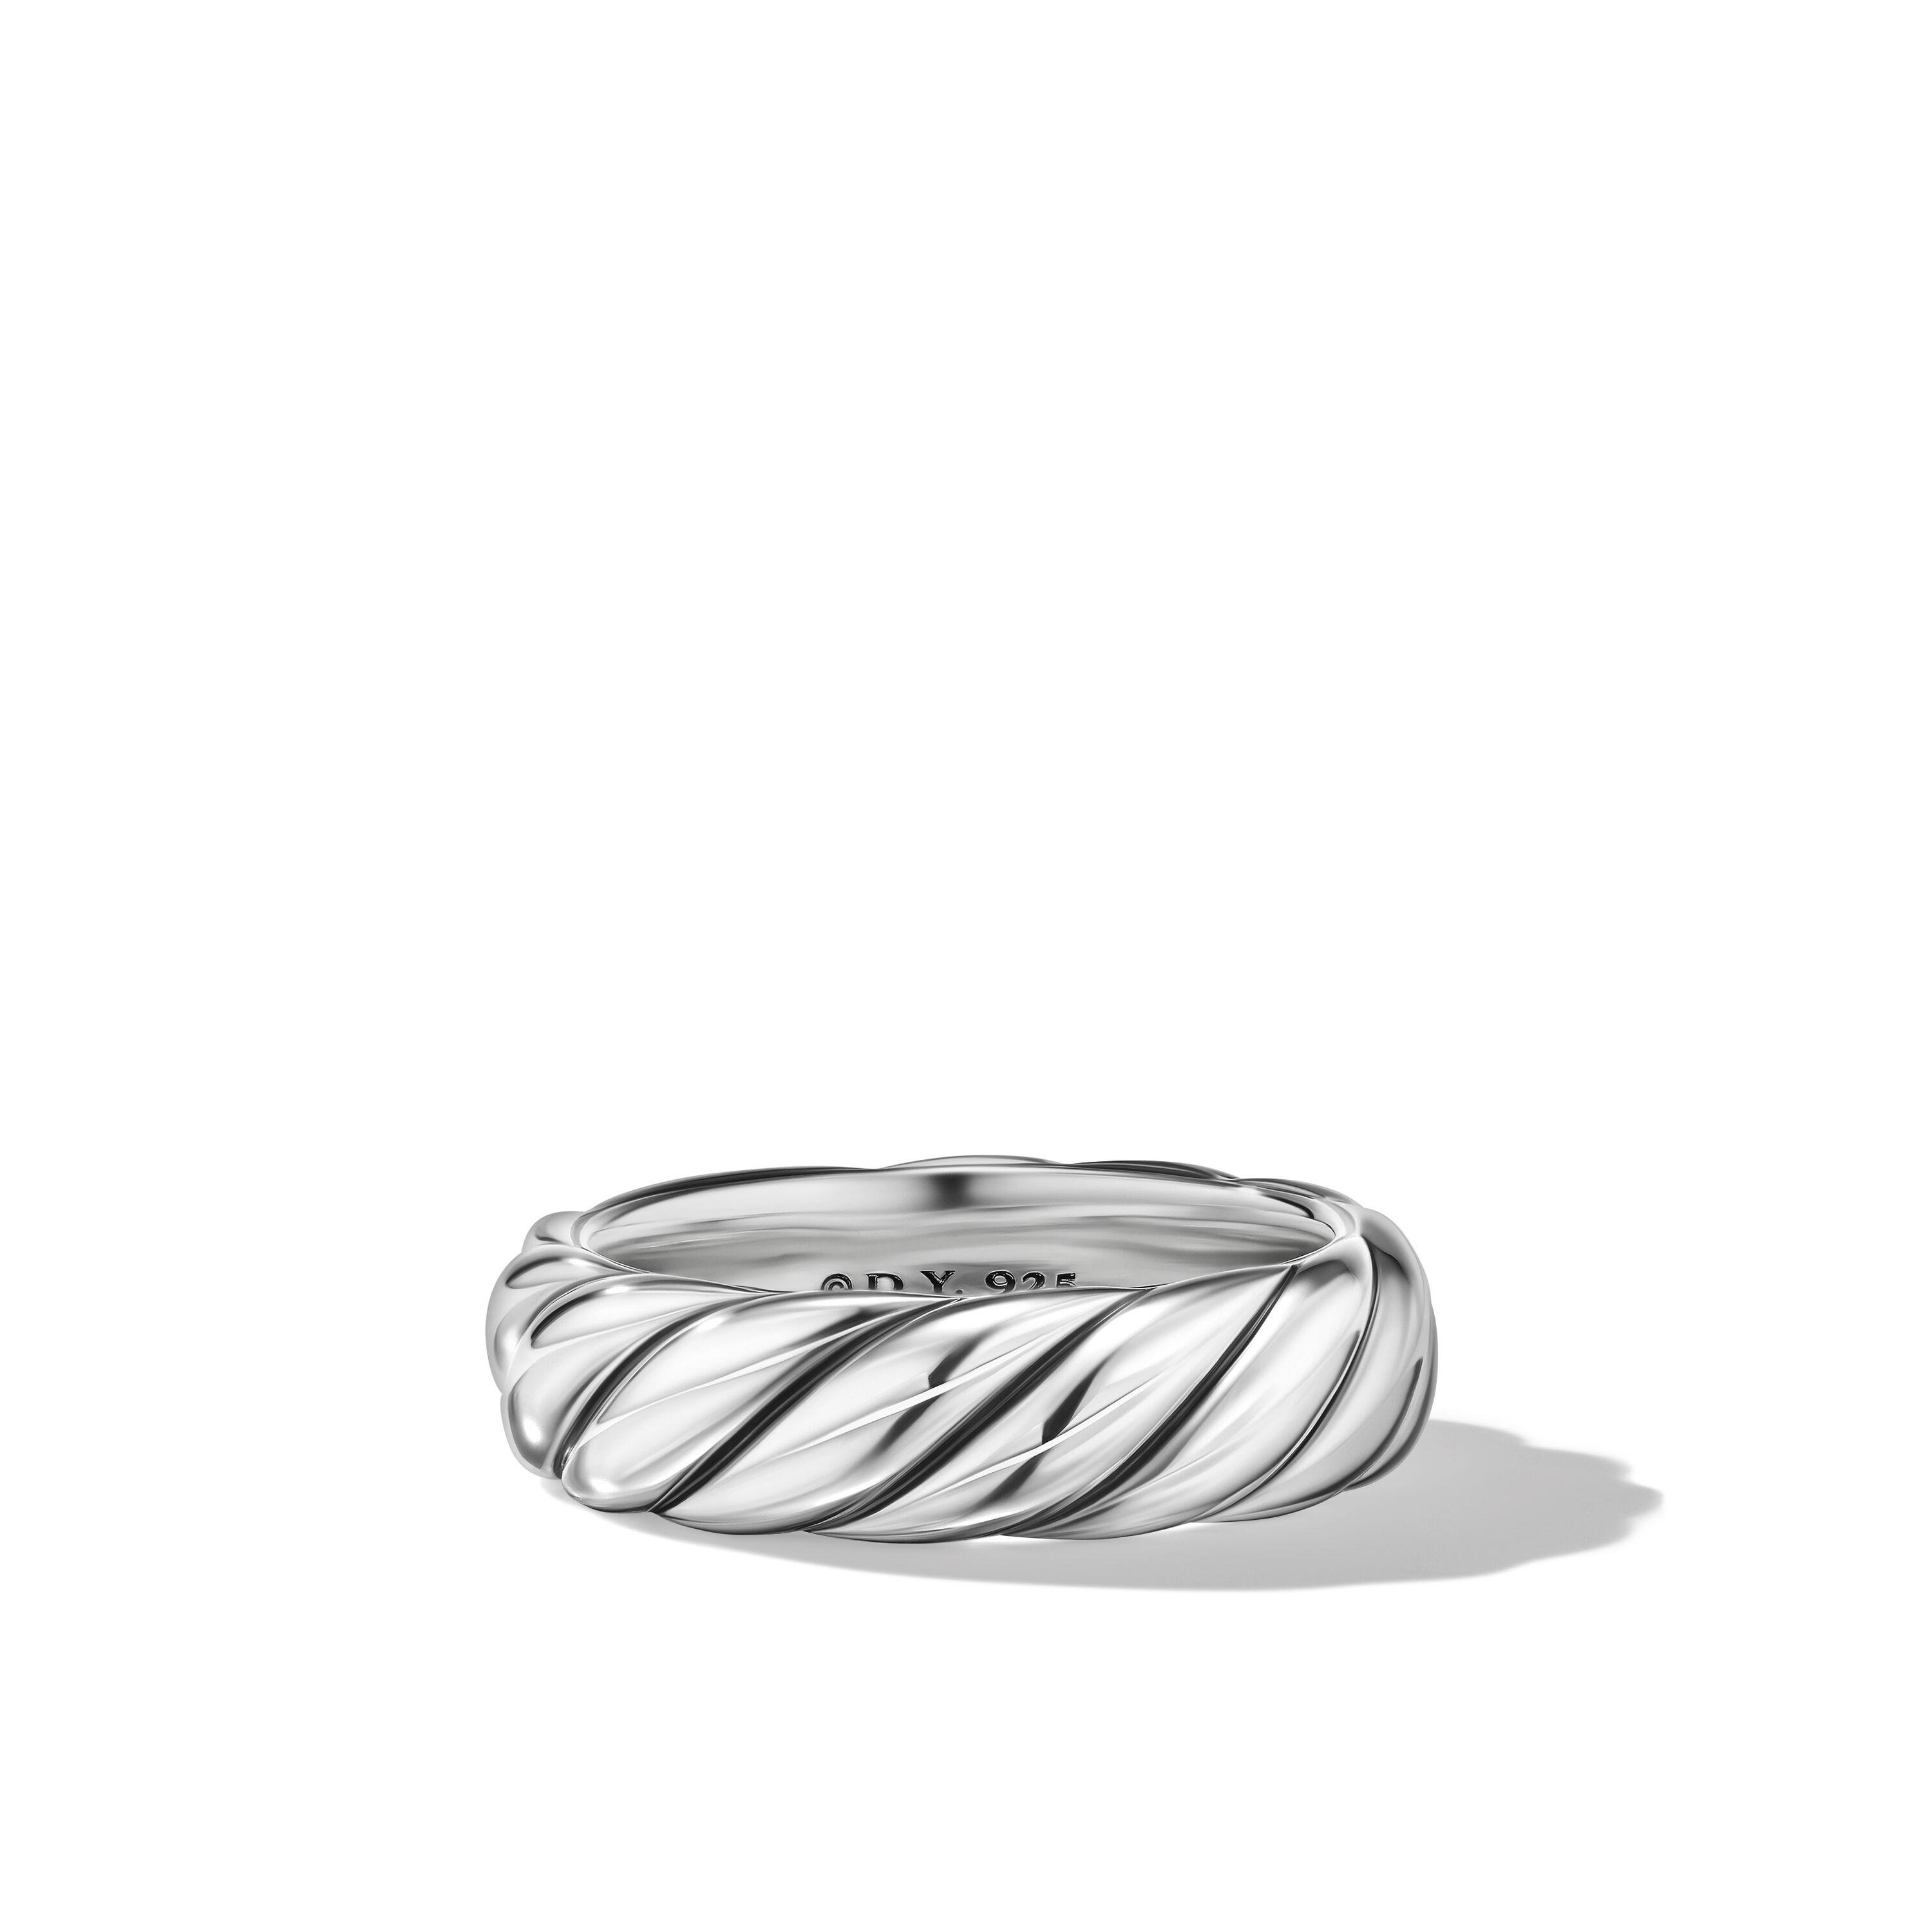 David Yurman Sculpted Cable 6mm Band in Sterling Silver, size 7 0